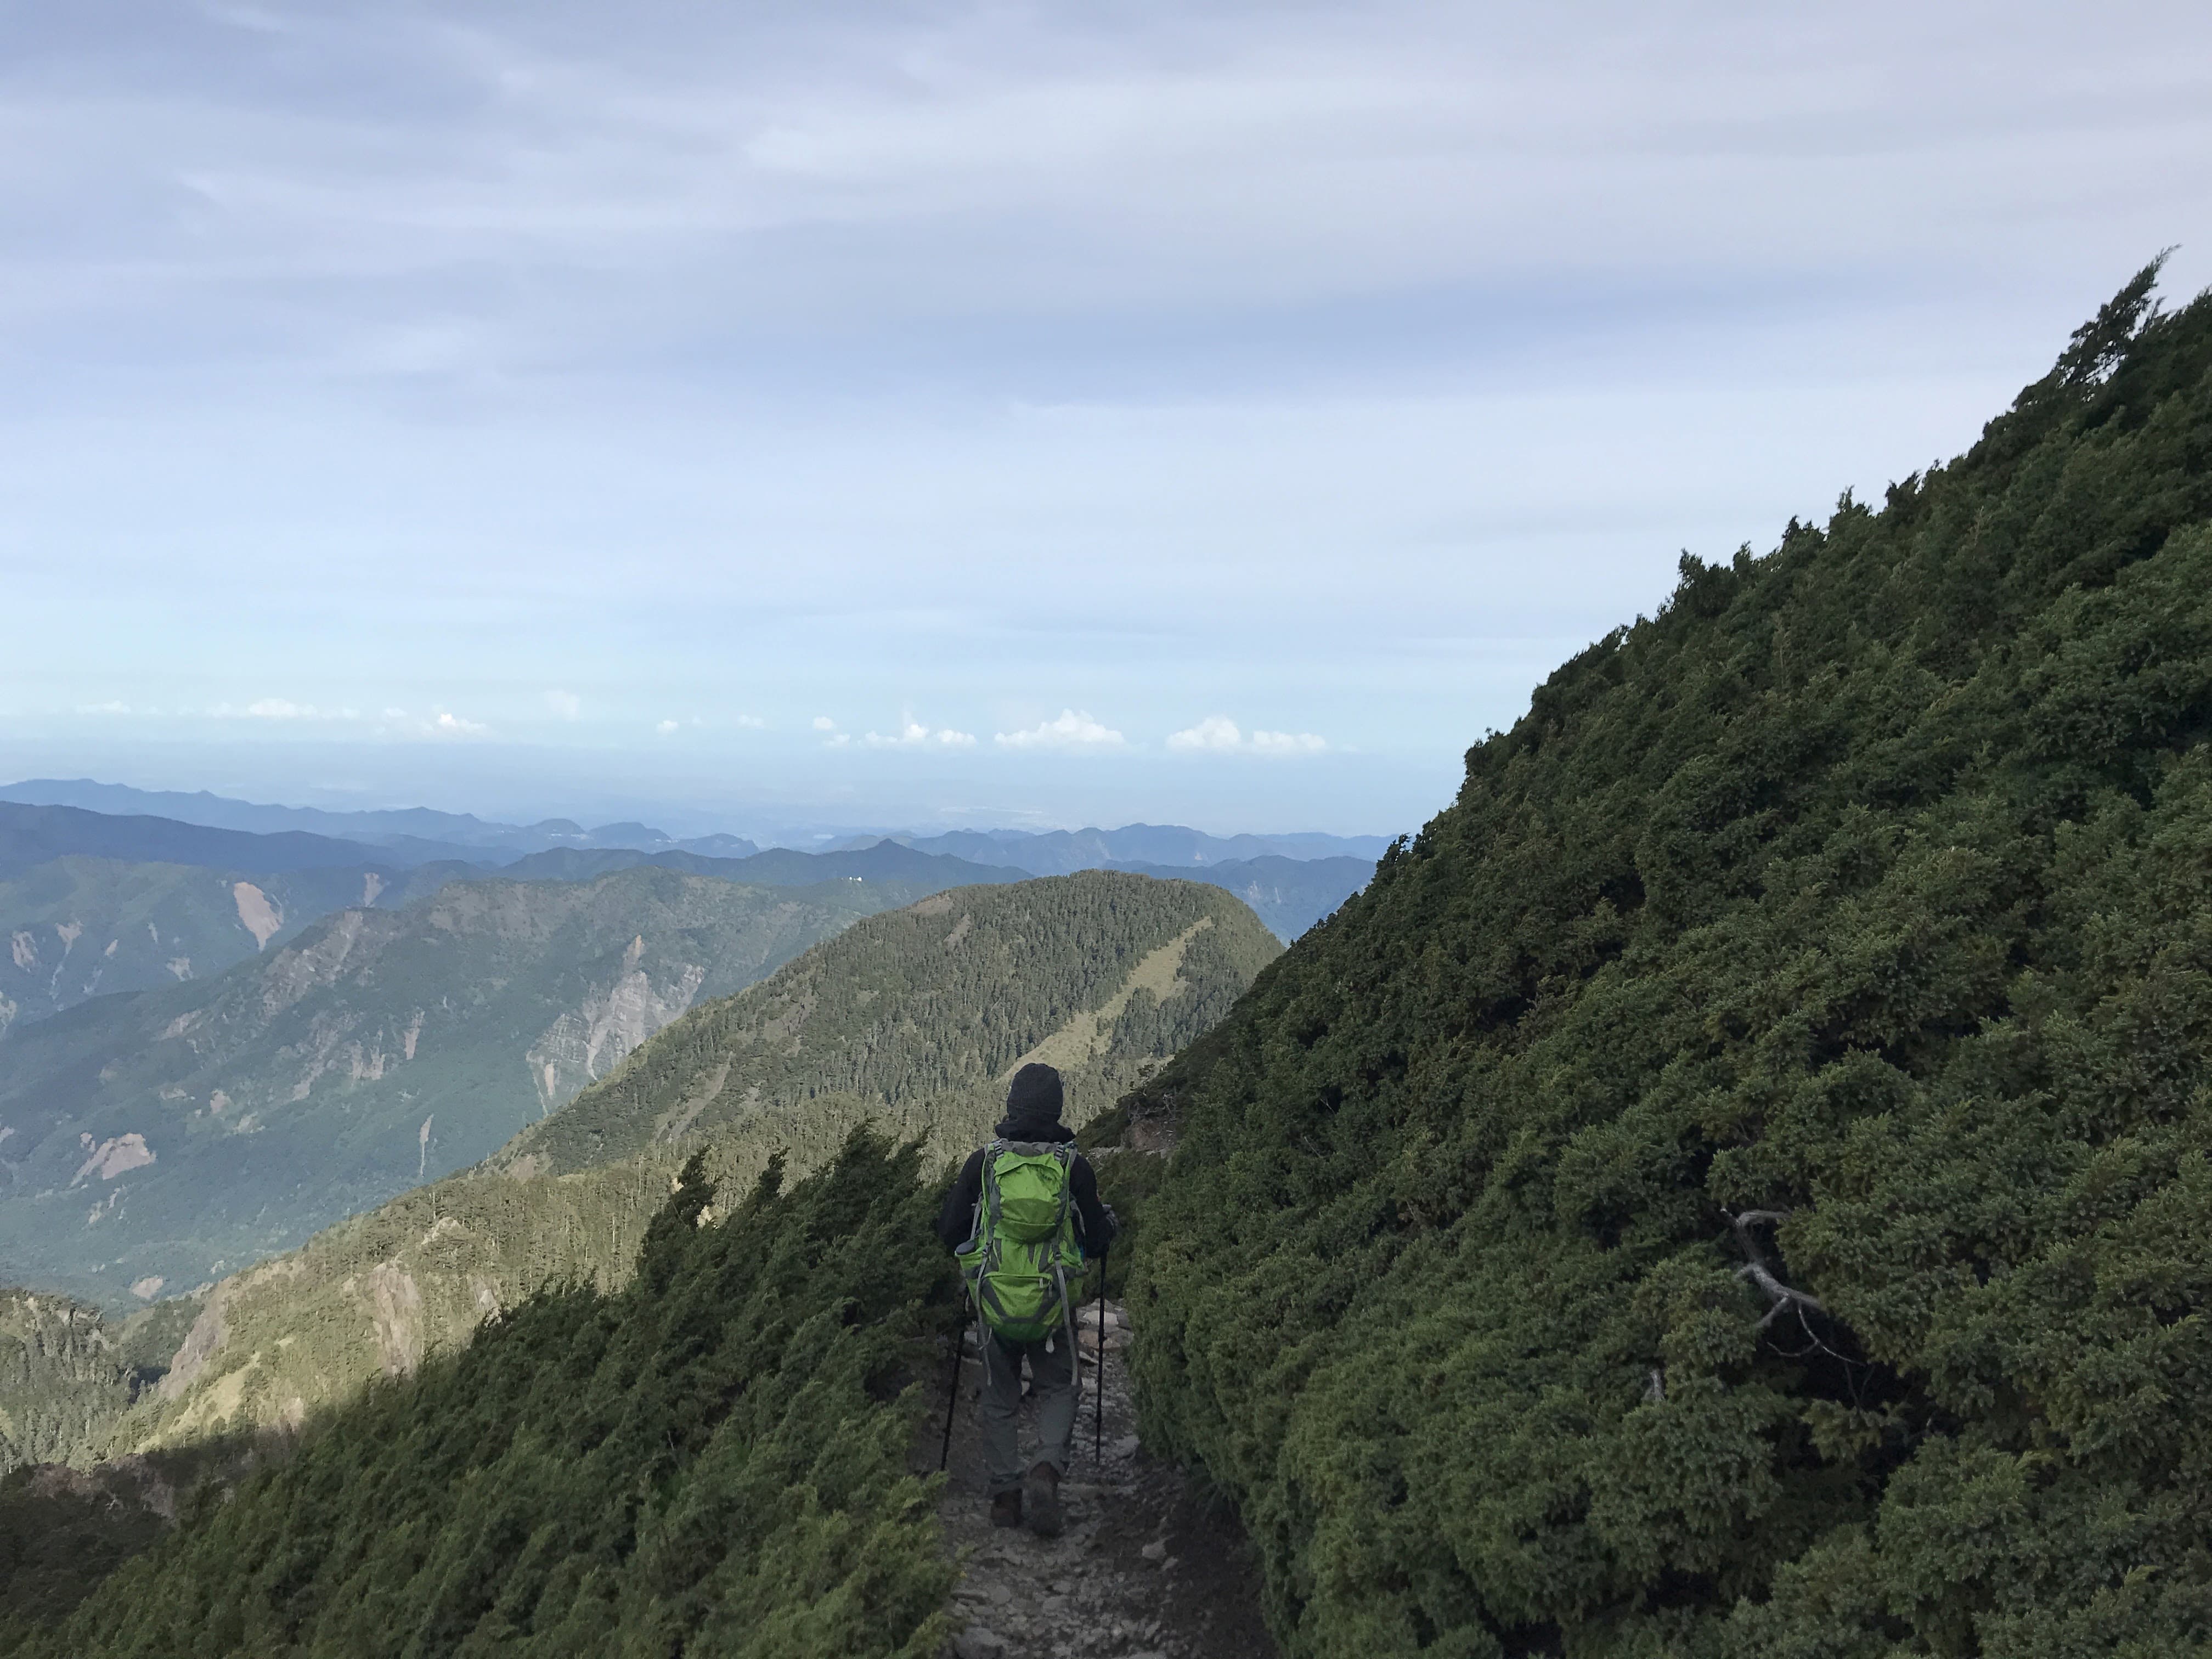 Two days and two nights on the main peak of Yushan Mountain in Nantou | Climb the highest peak in Taiwan